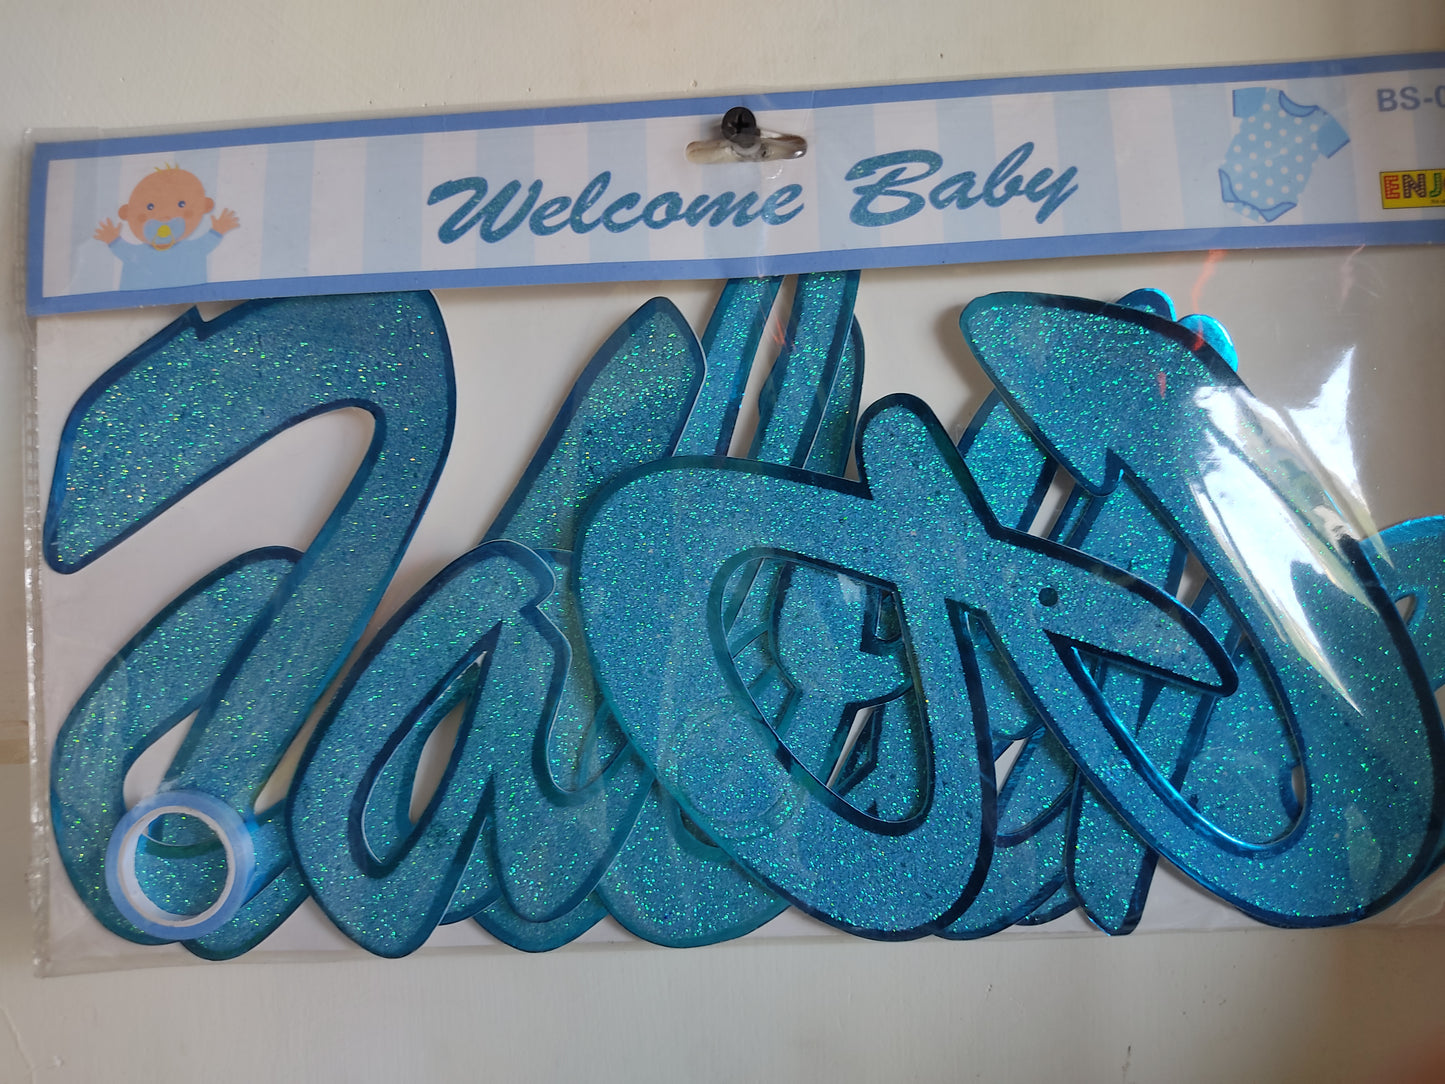 Glittering Blue Cursive Welcome Baby Banner